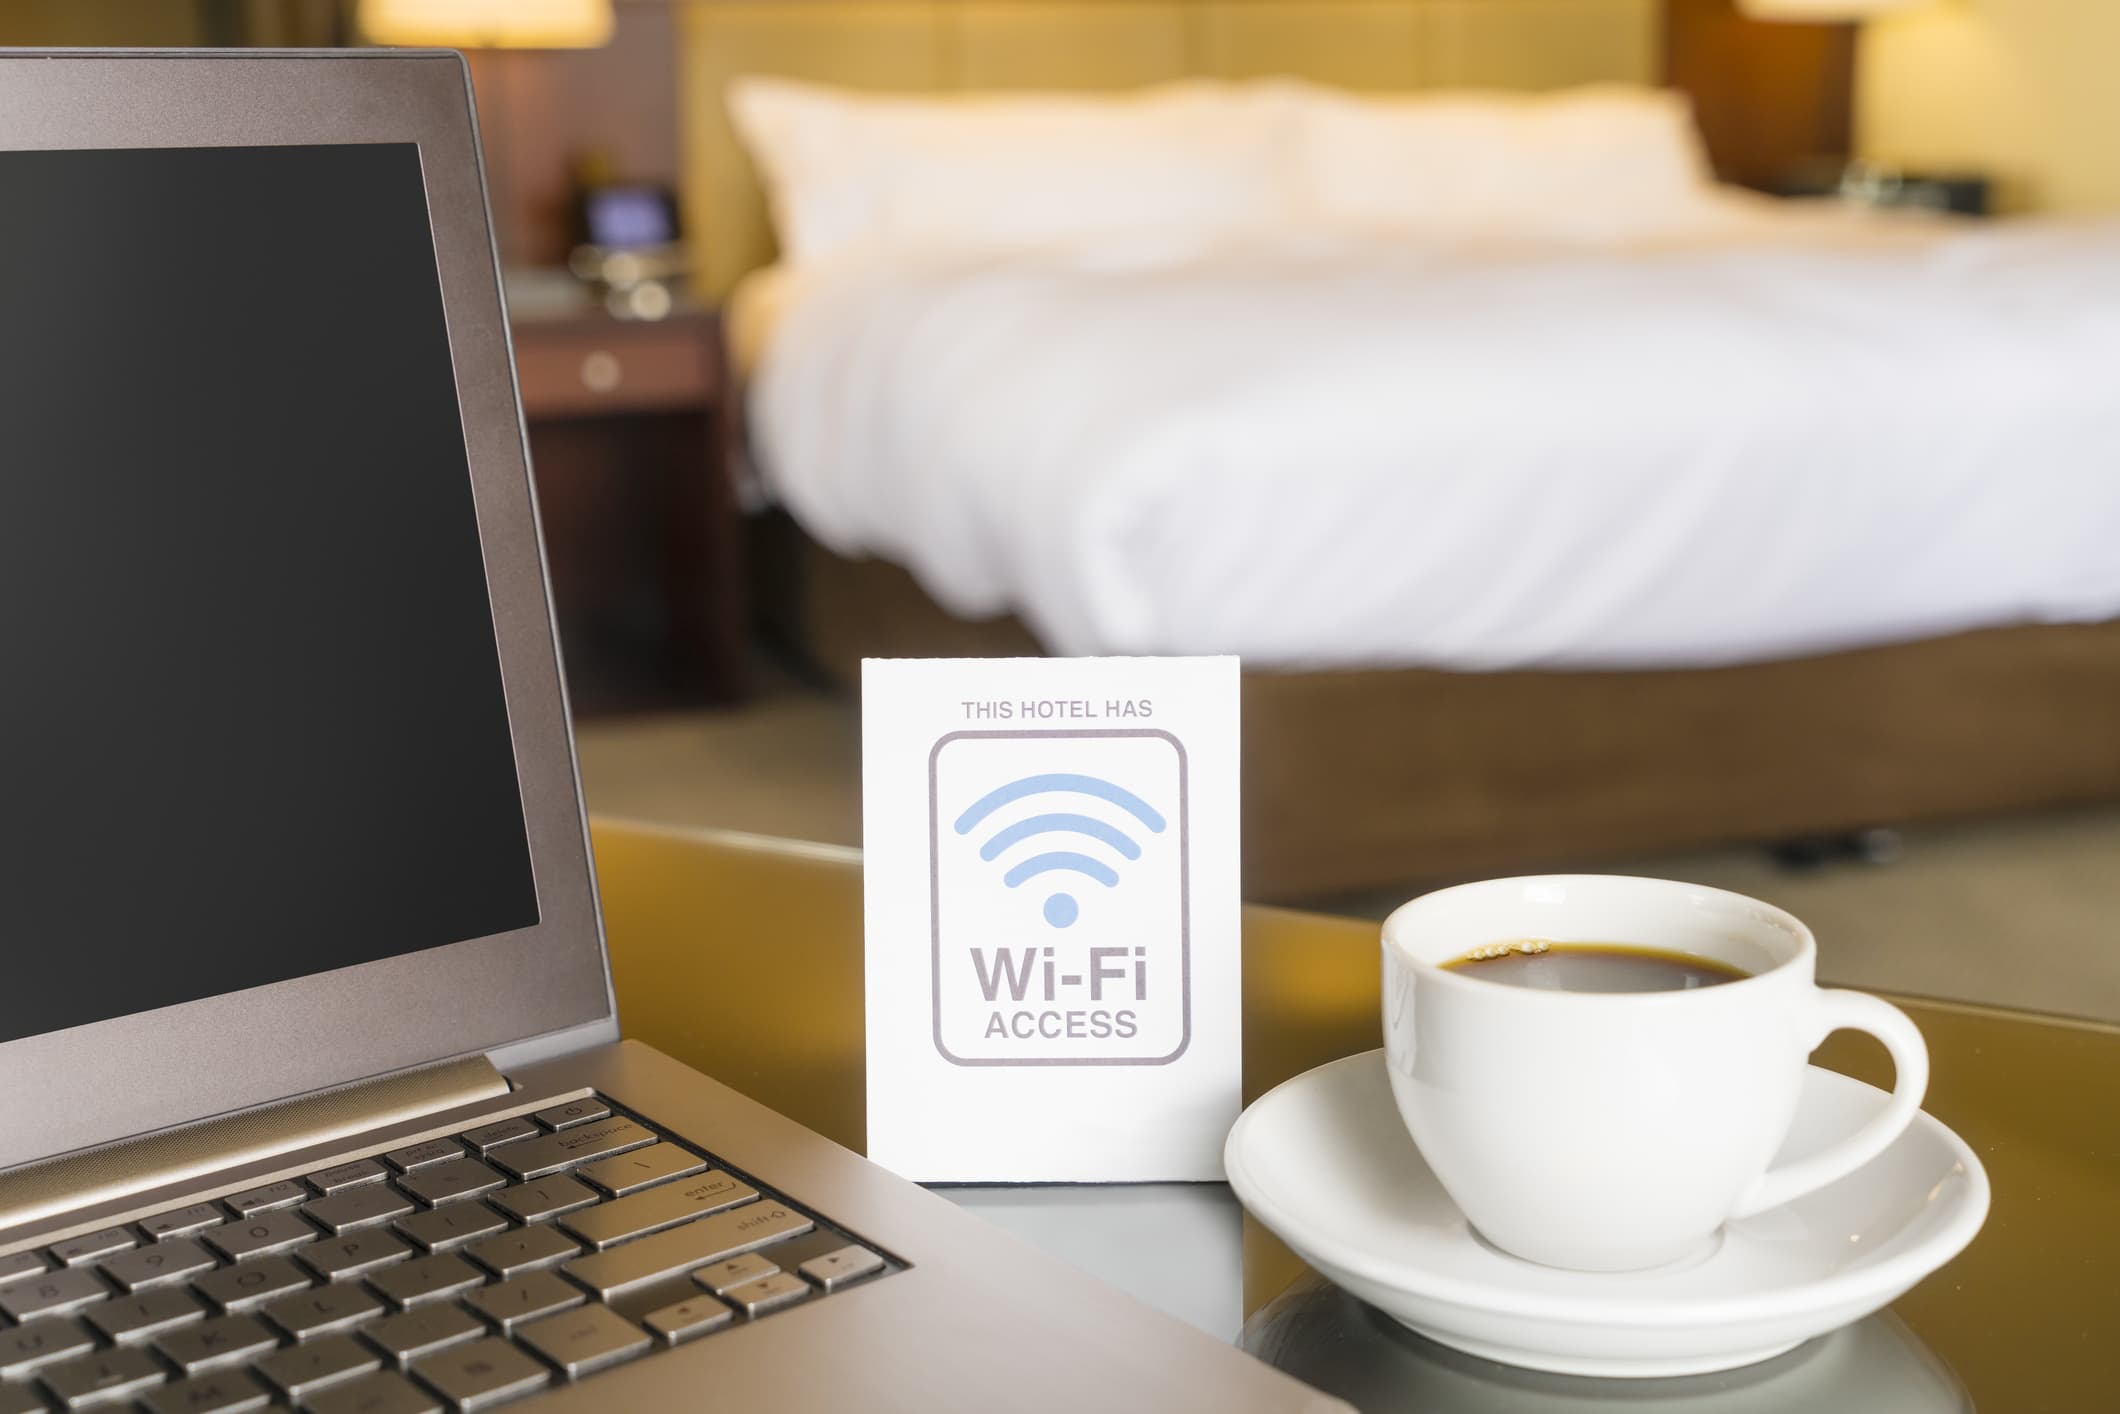 A hotel desk with laptop, cup of coffee, and wi-fi sign